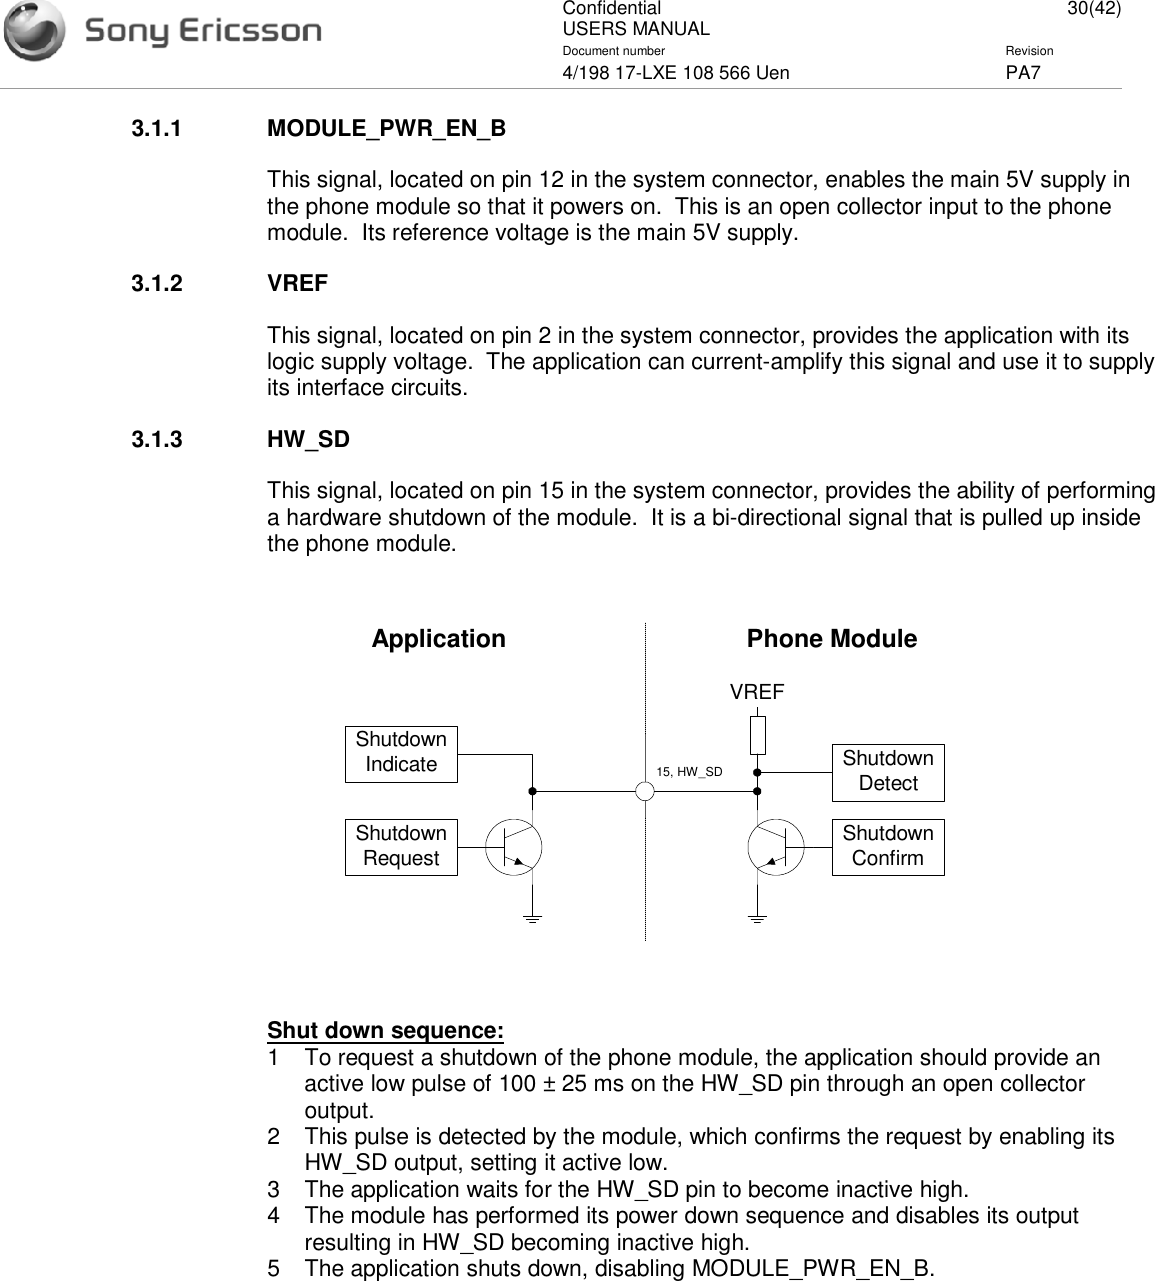 ConfidentialUSERS MANUAL 30(42)Document number Revision4/198 17-LXE 108 566 Uen PA73.1.1 MODULE_PWR_EN_BThis signal, located on pin 12 in the system connector, enables the main 5V supply inthe phone module so that it powers on. This is an open collector input to the phonemodule. Its reference voltage is the main 5V supply.3.1.2 VREFThis signal, located on pin 2 in the system connector, provides the application with itslogic supply voltage. The application can current-amplify this signal and use it to supplyits interface circuits.3.1.3 HW_SDThis signal, located on pin 15 in the system connector, provides the ability of performinga hardware shutdown of the module. It is a bi-directional signal that is pulled up insidethe phone module.Shut down sequence:1 To request a shutdown of the phone module, the application should provide anactive low pulse of 100 ± 25 ms on the HW_SD pin through an open collectoroutput.2 This pulse is detected by the module, which confirms the request by enabling itsHW_SD output, setting it active low.3 The application waits for the HW_SD pin to become inactive high.4 The module has performed its power down sequence and disables its outputresulting in HW_SD becoming inactive high.5 The application shuts down, disabling MODULE_PWR_EN_B.ShutdownIndicateShutdownRequest ShutdownConfirmShutdownDetectVREF15, HW_SDApplication Phone Module